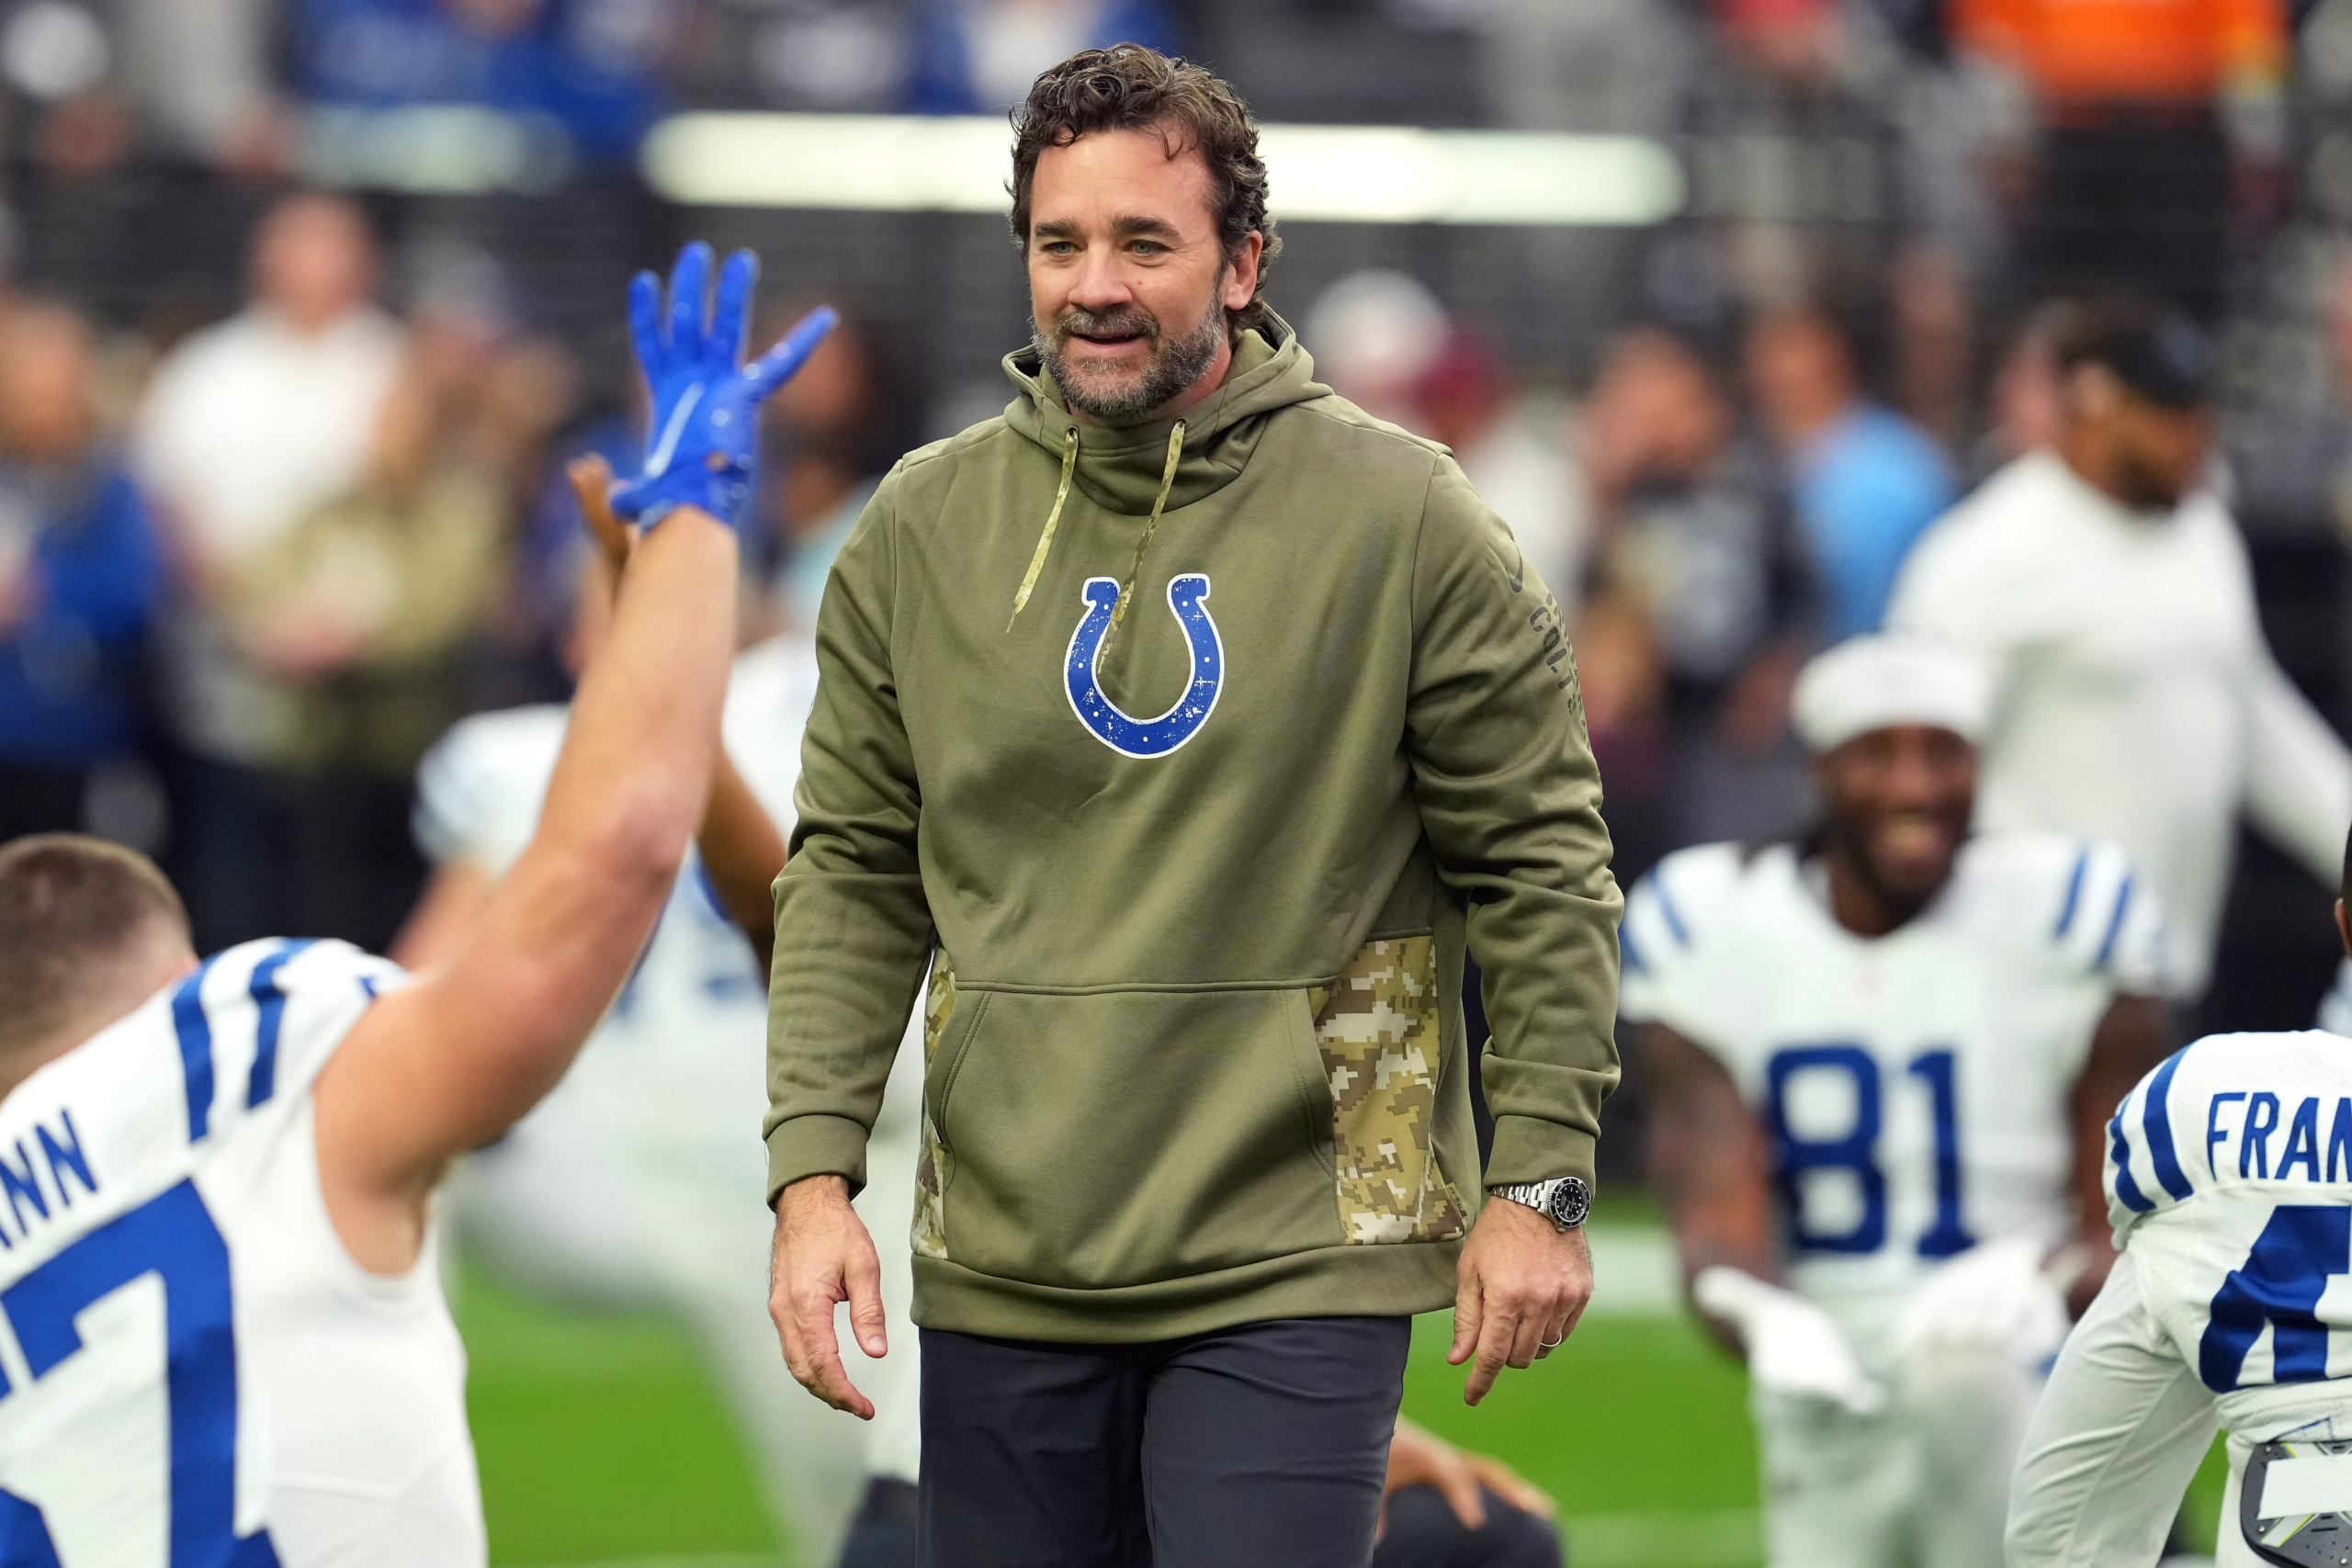 Jeff Saturday makes strong first impression with win in Indianapolis Colts coaching debut